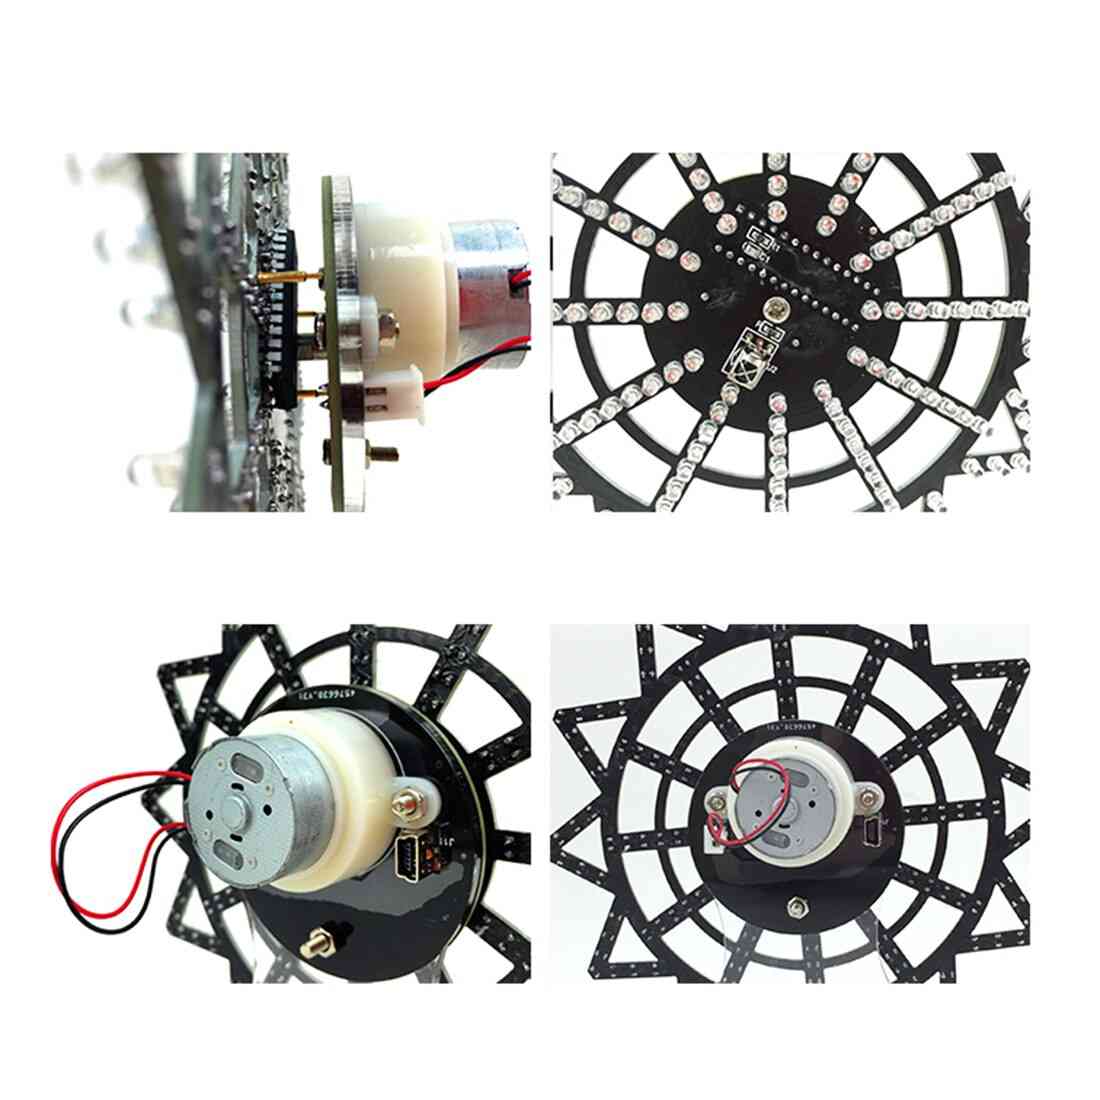 Diy Colorful Led Automatic Rotating Ferris Wheel Kit Electronic Components